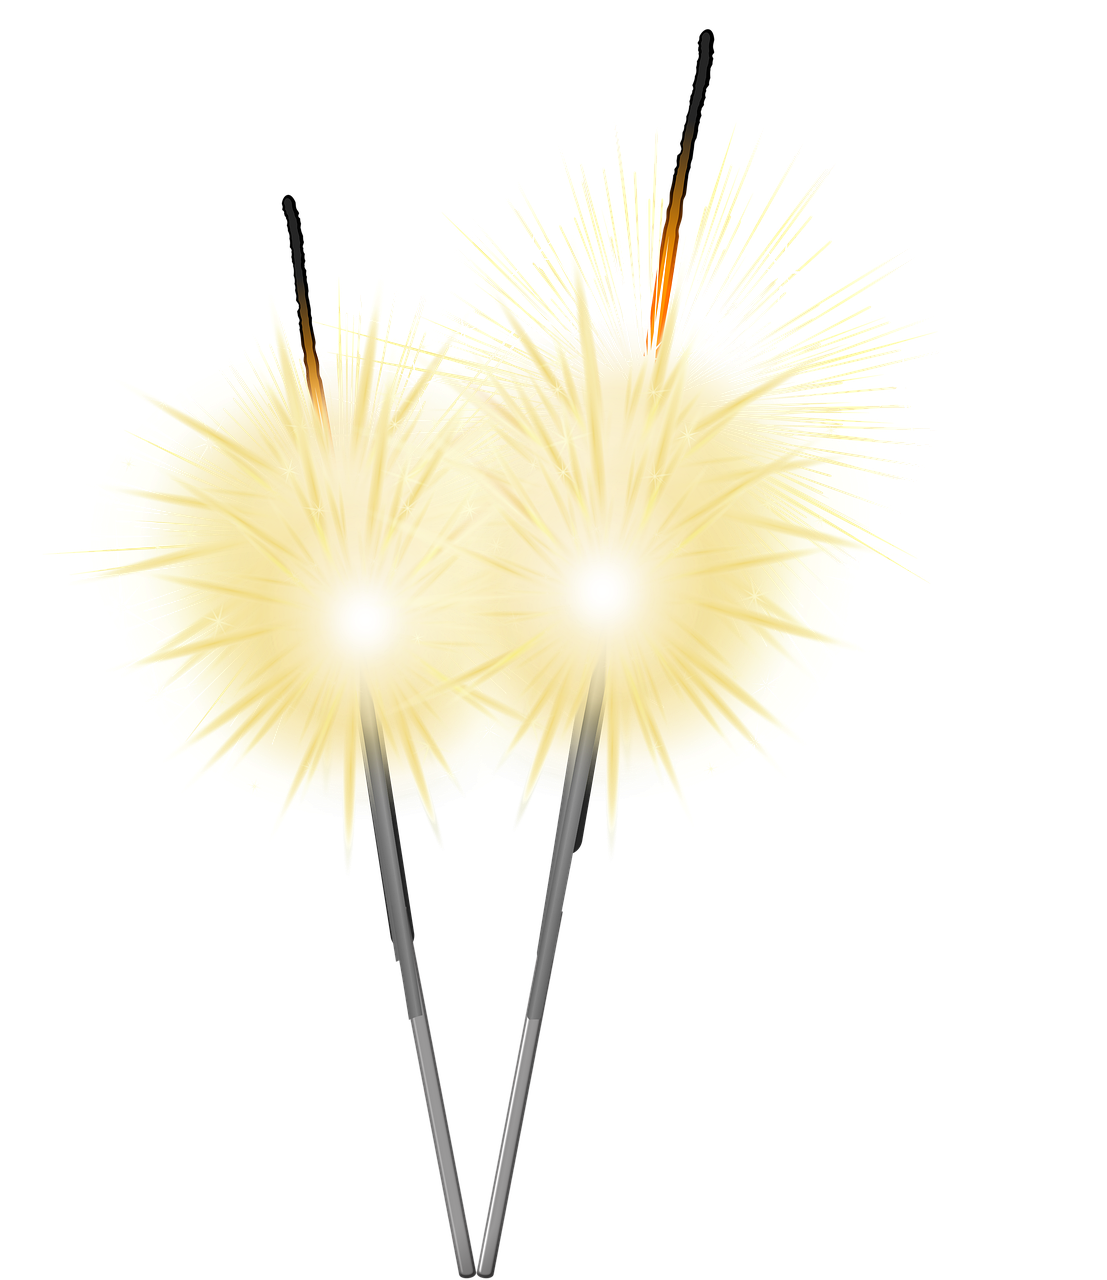 a couple of toothbrushes sitting on top of each other, a digital rendering, rasquache, sparklers, light yellow, 中 国 鬼 节, fire staff